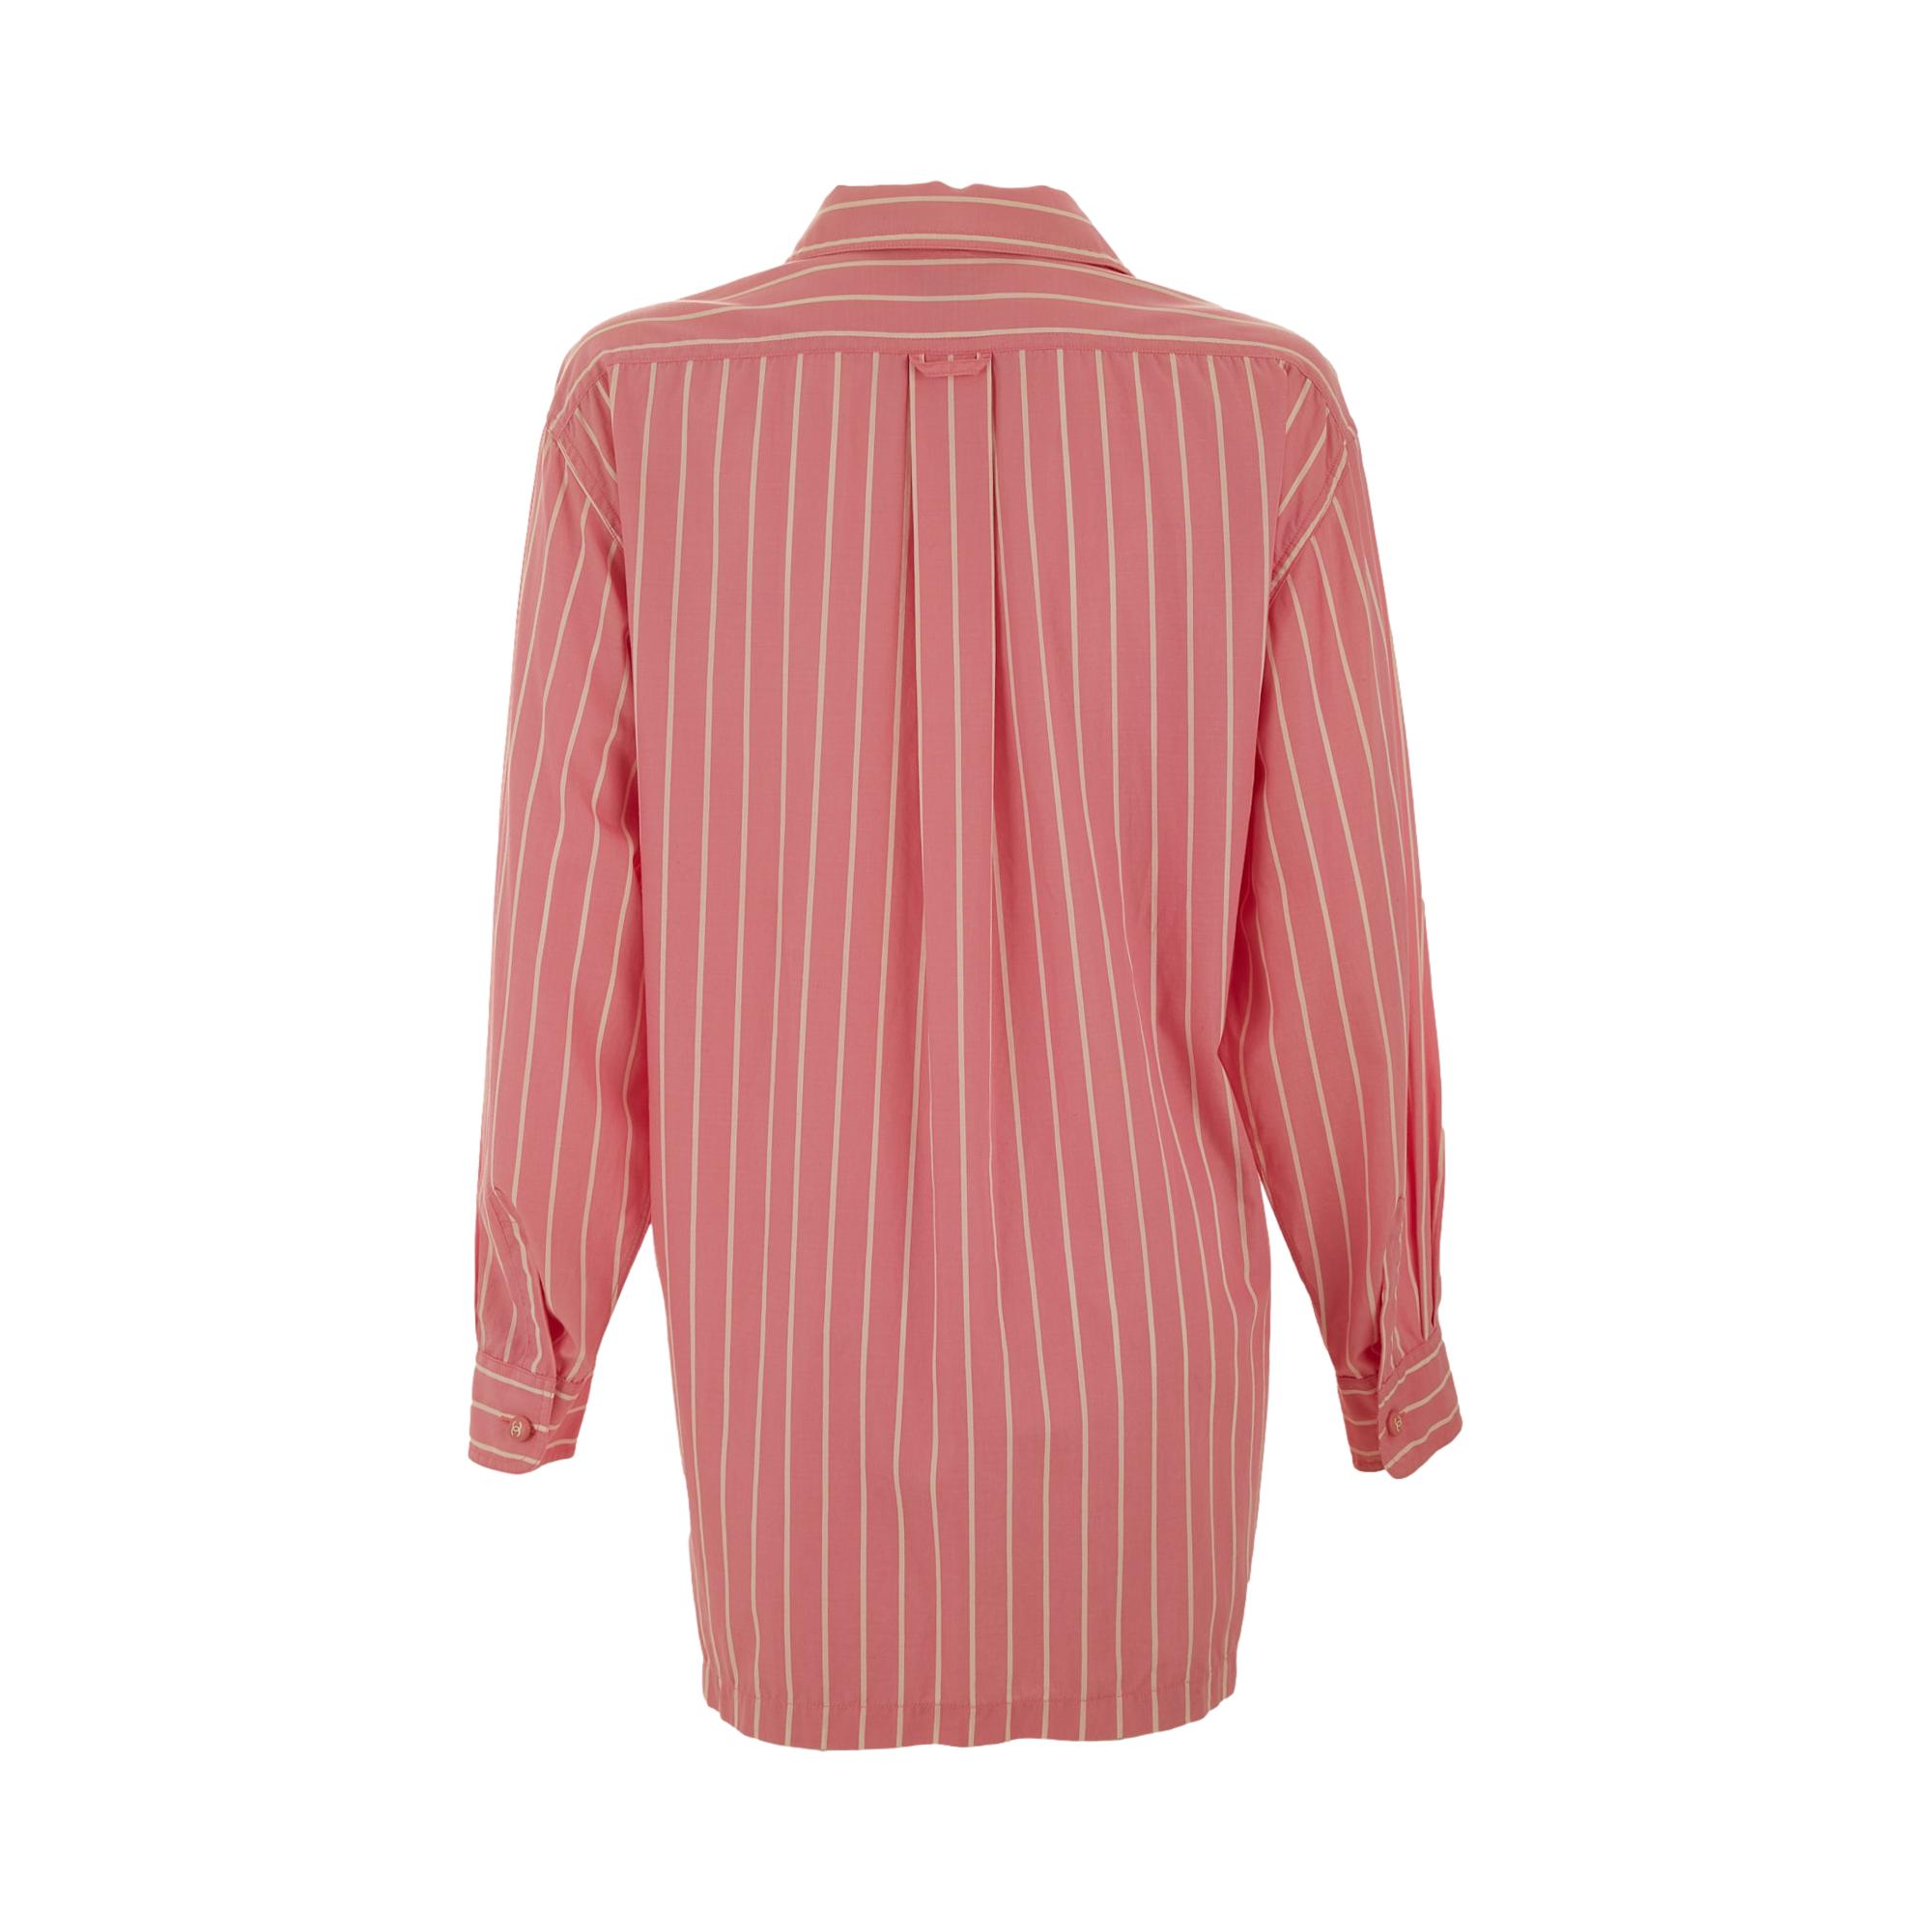 Treasures of NYC - Chanel Pink Striped Button Down